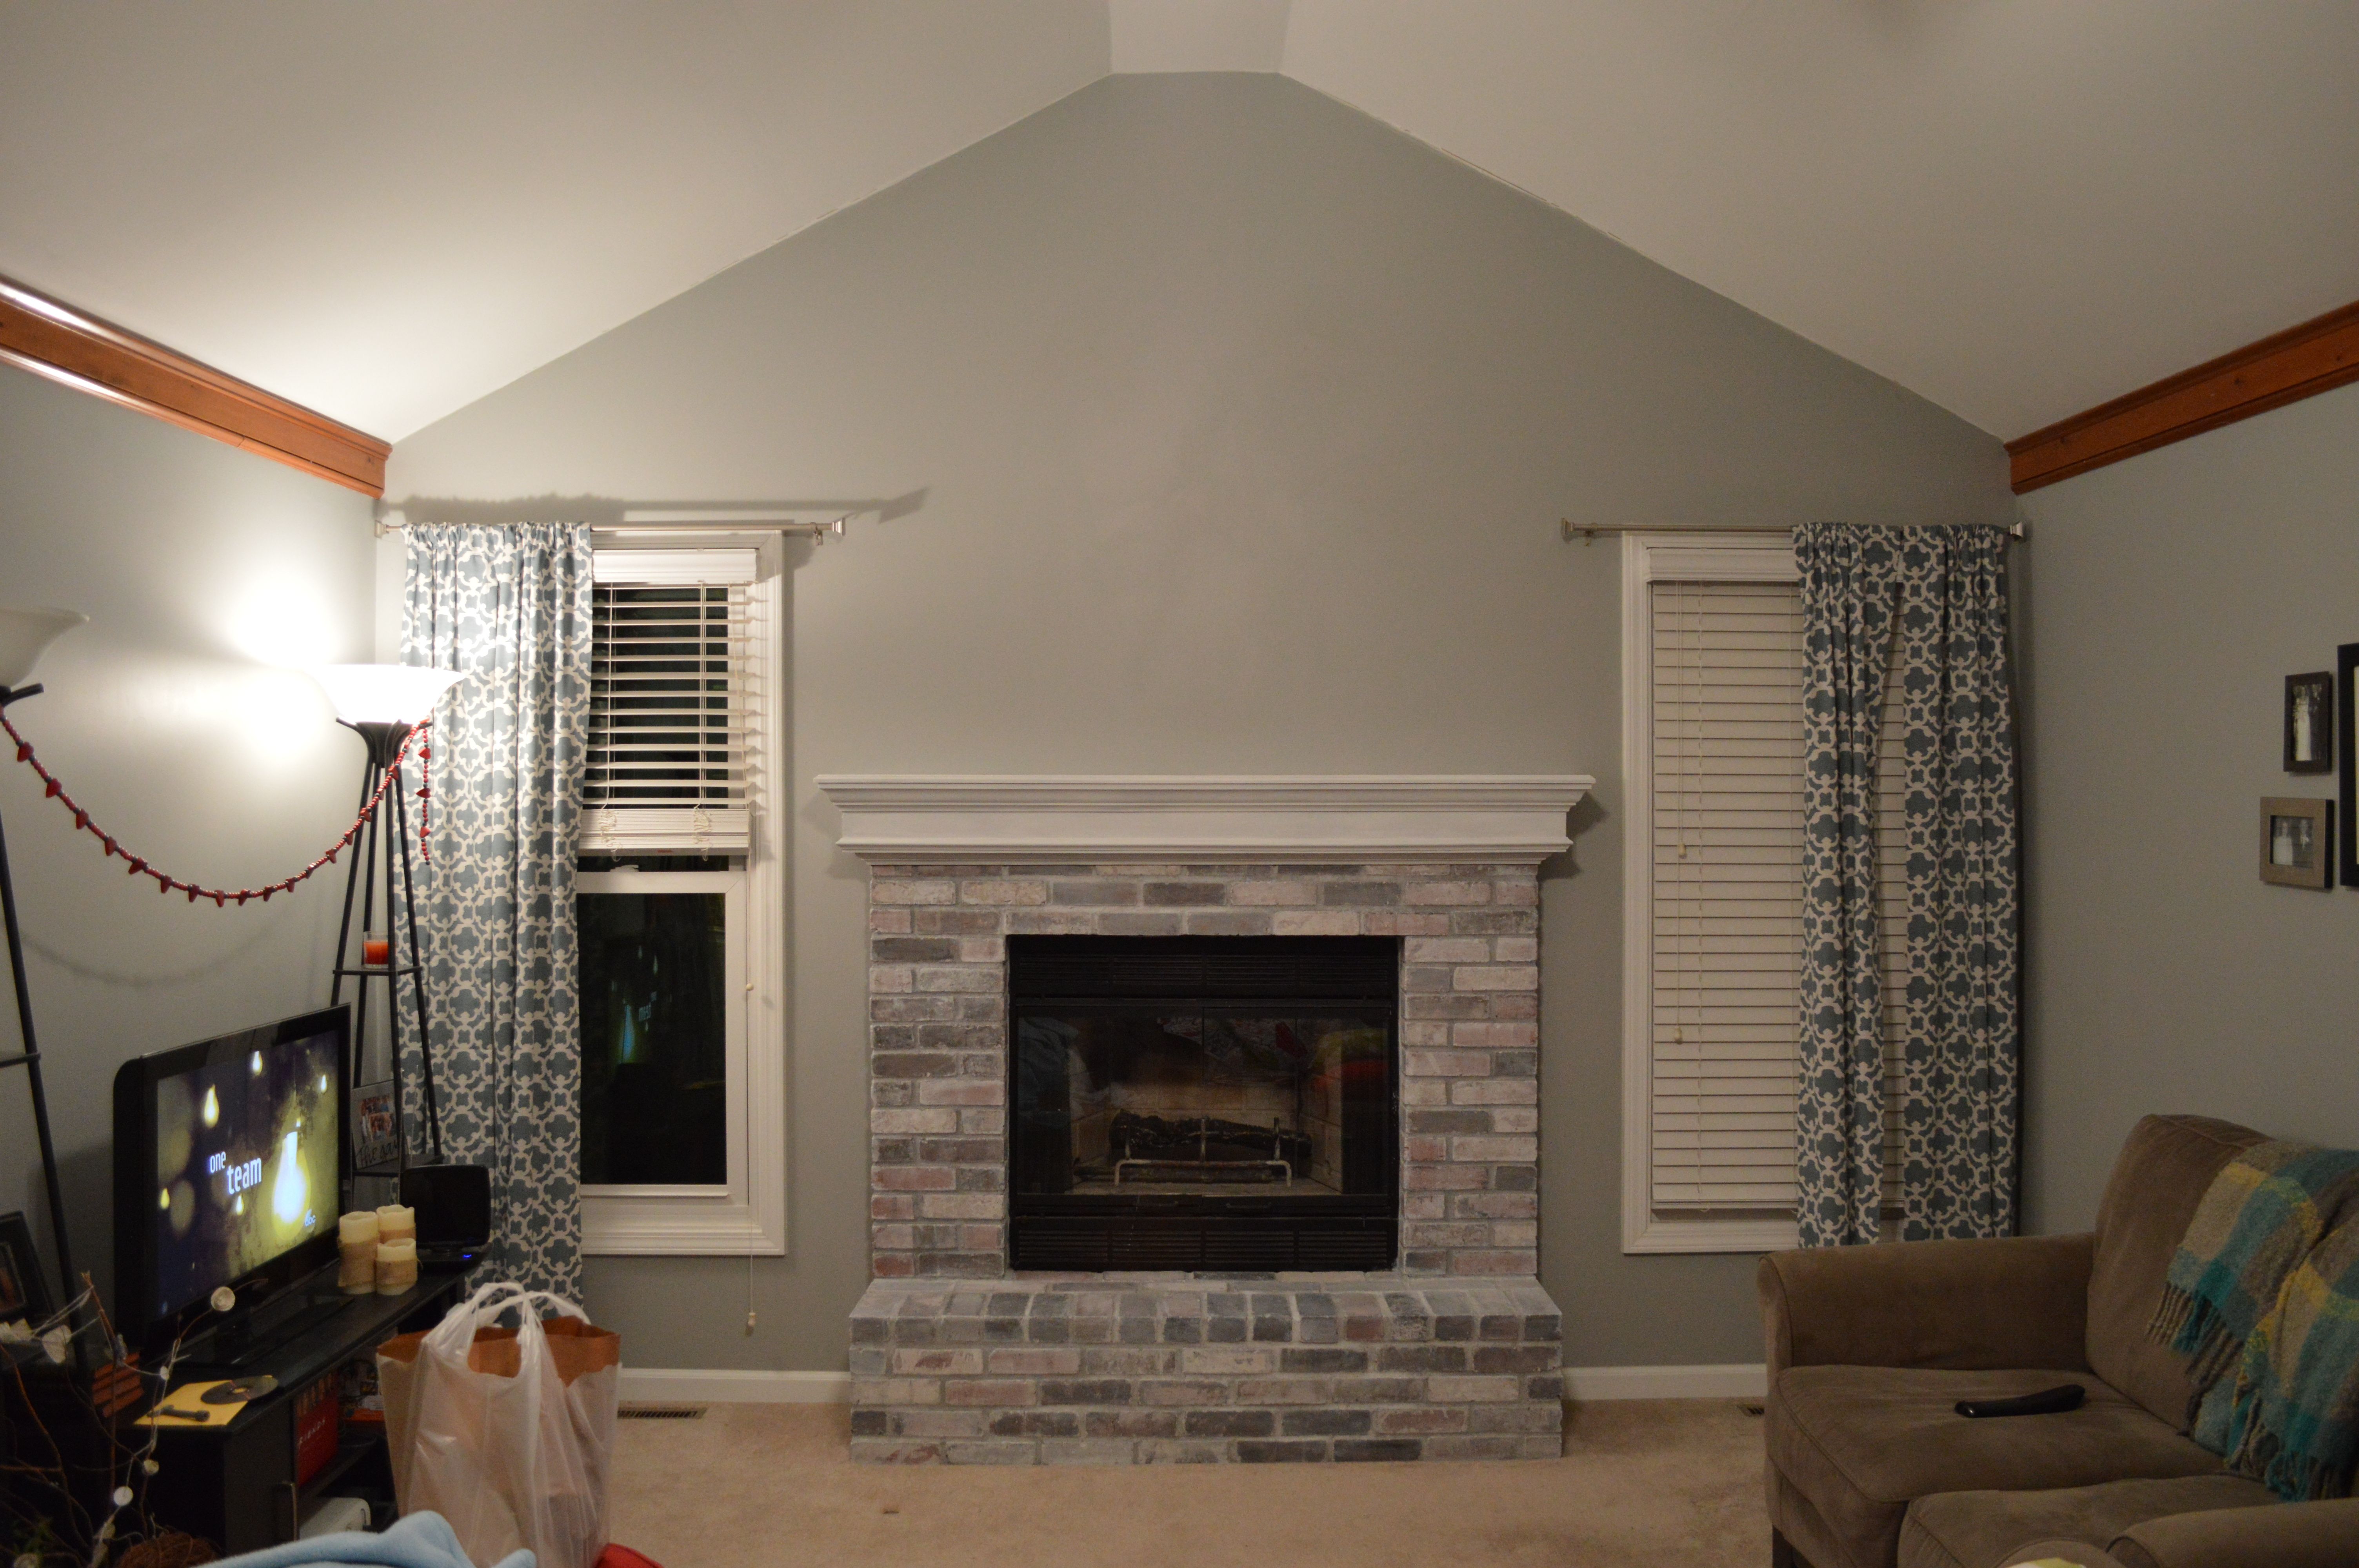 Red Brick Fireplace Makeover New How to Whitewash Brick Our Fireplace Makeover Loving